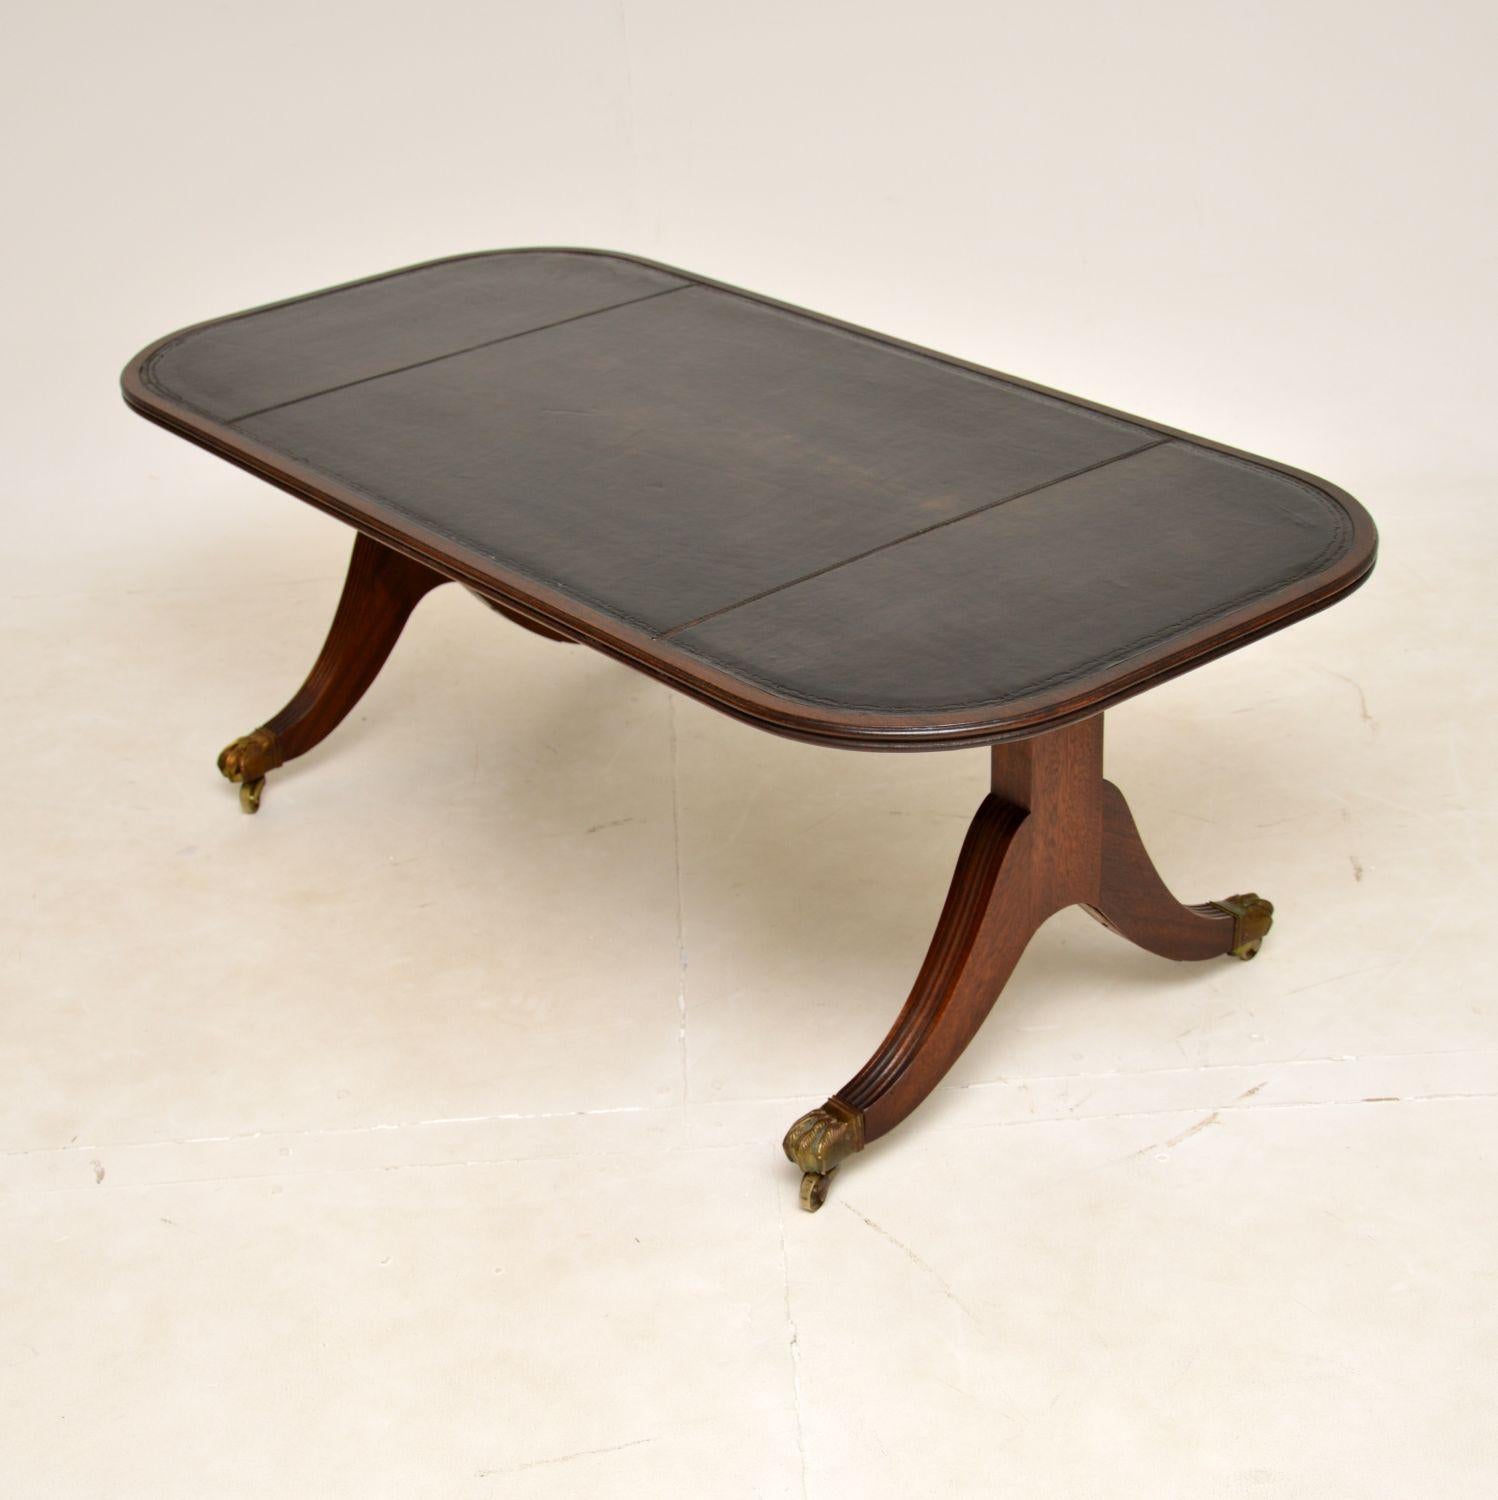 Regency Antique Leather Top Coffee Table